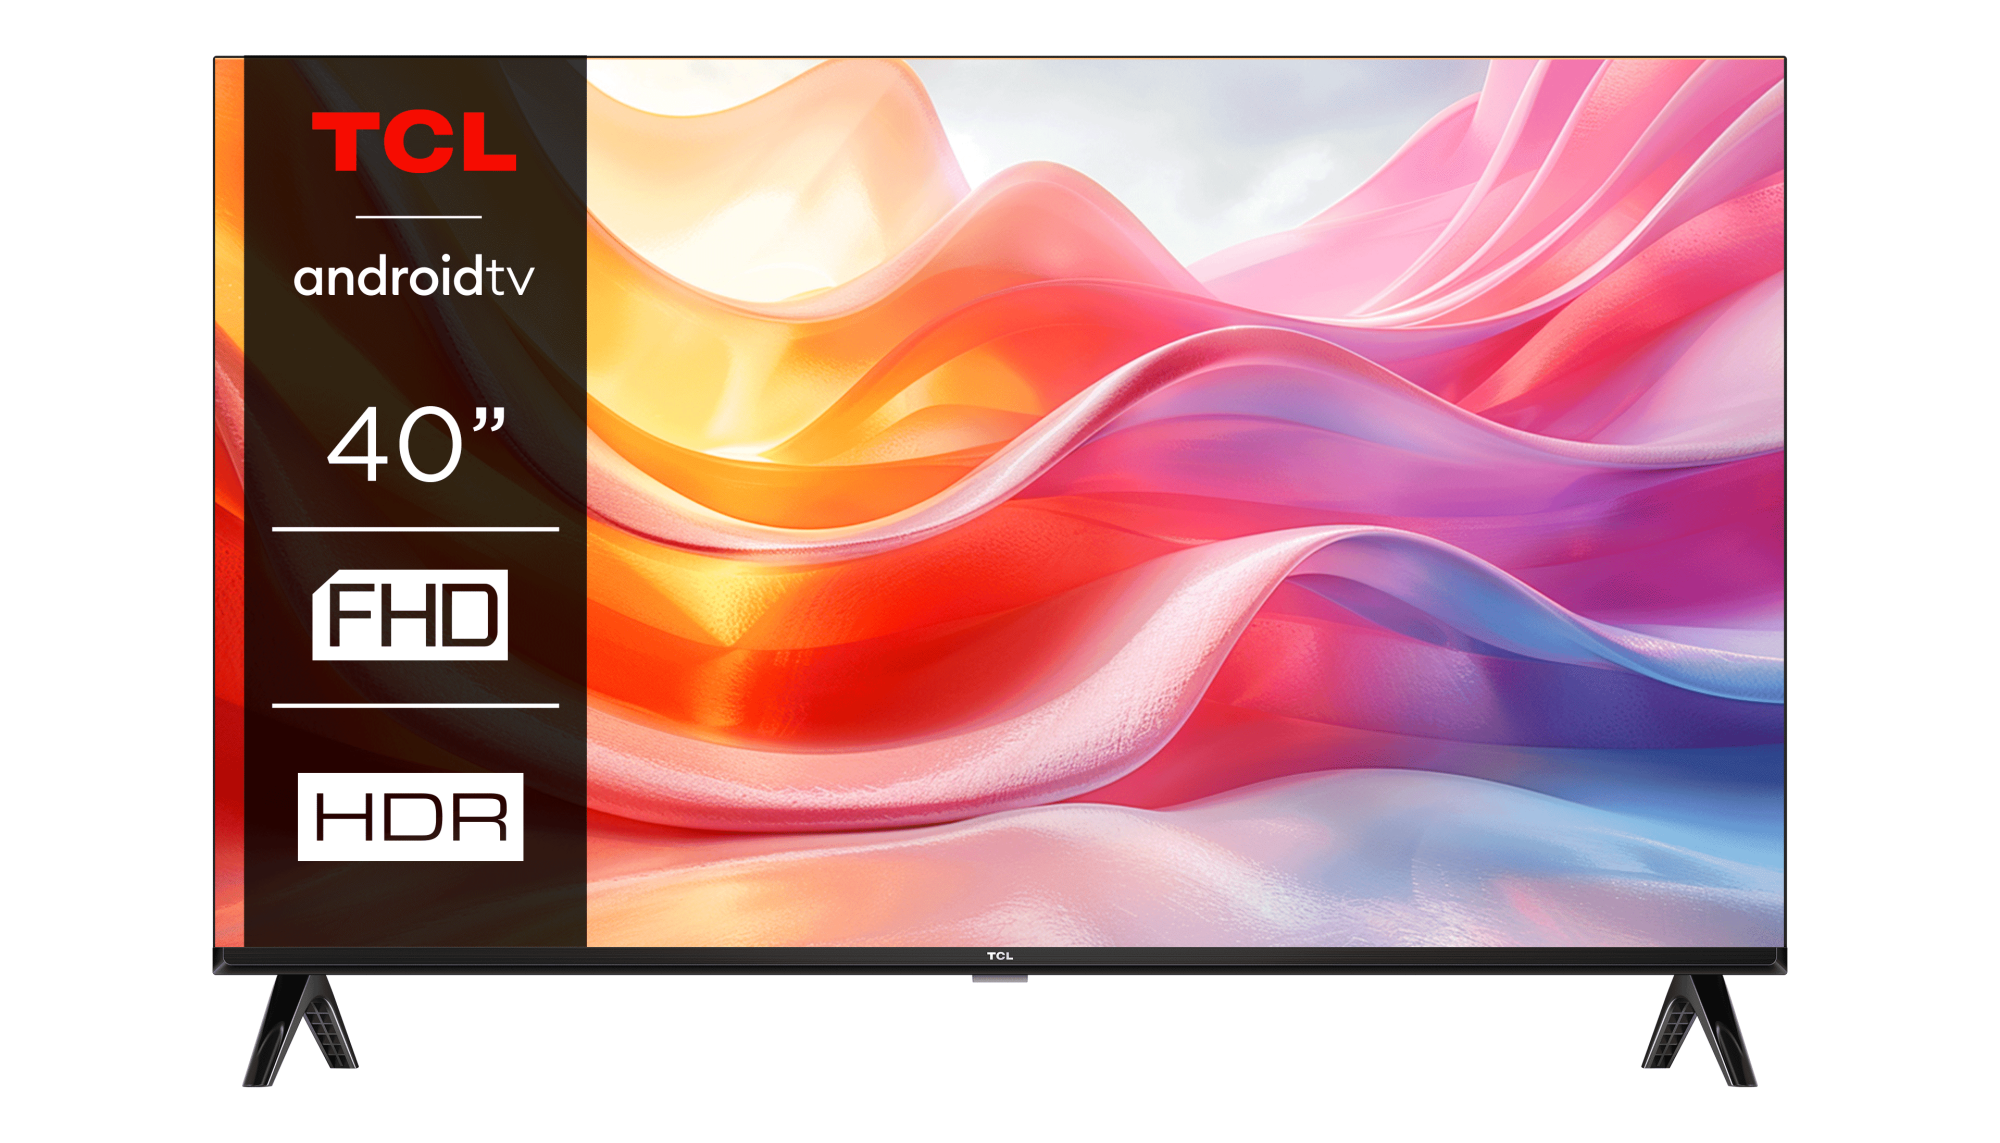 TCL 40L5A 40L5A - Full HD Android LED TV